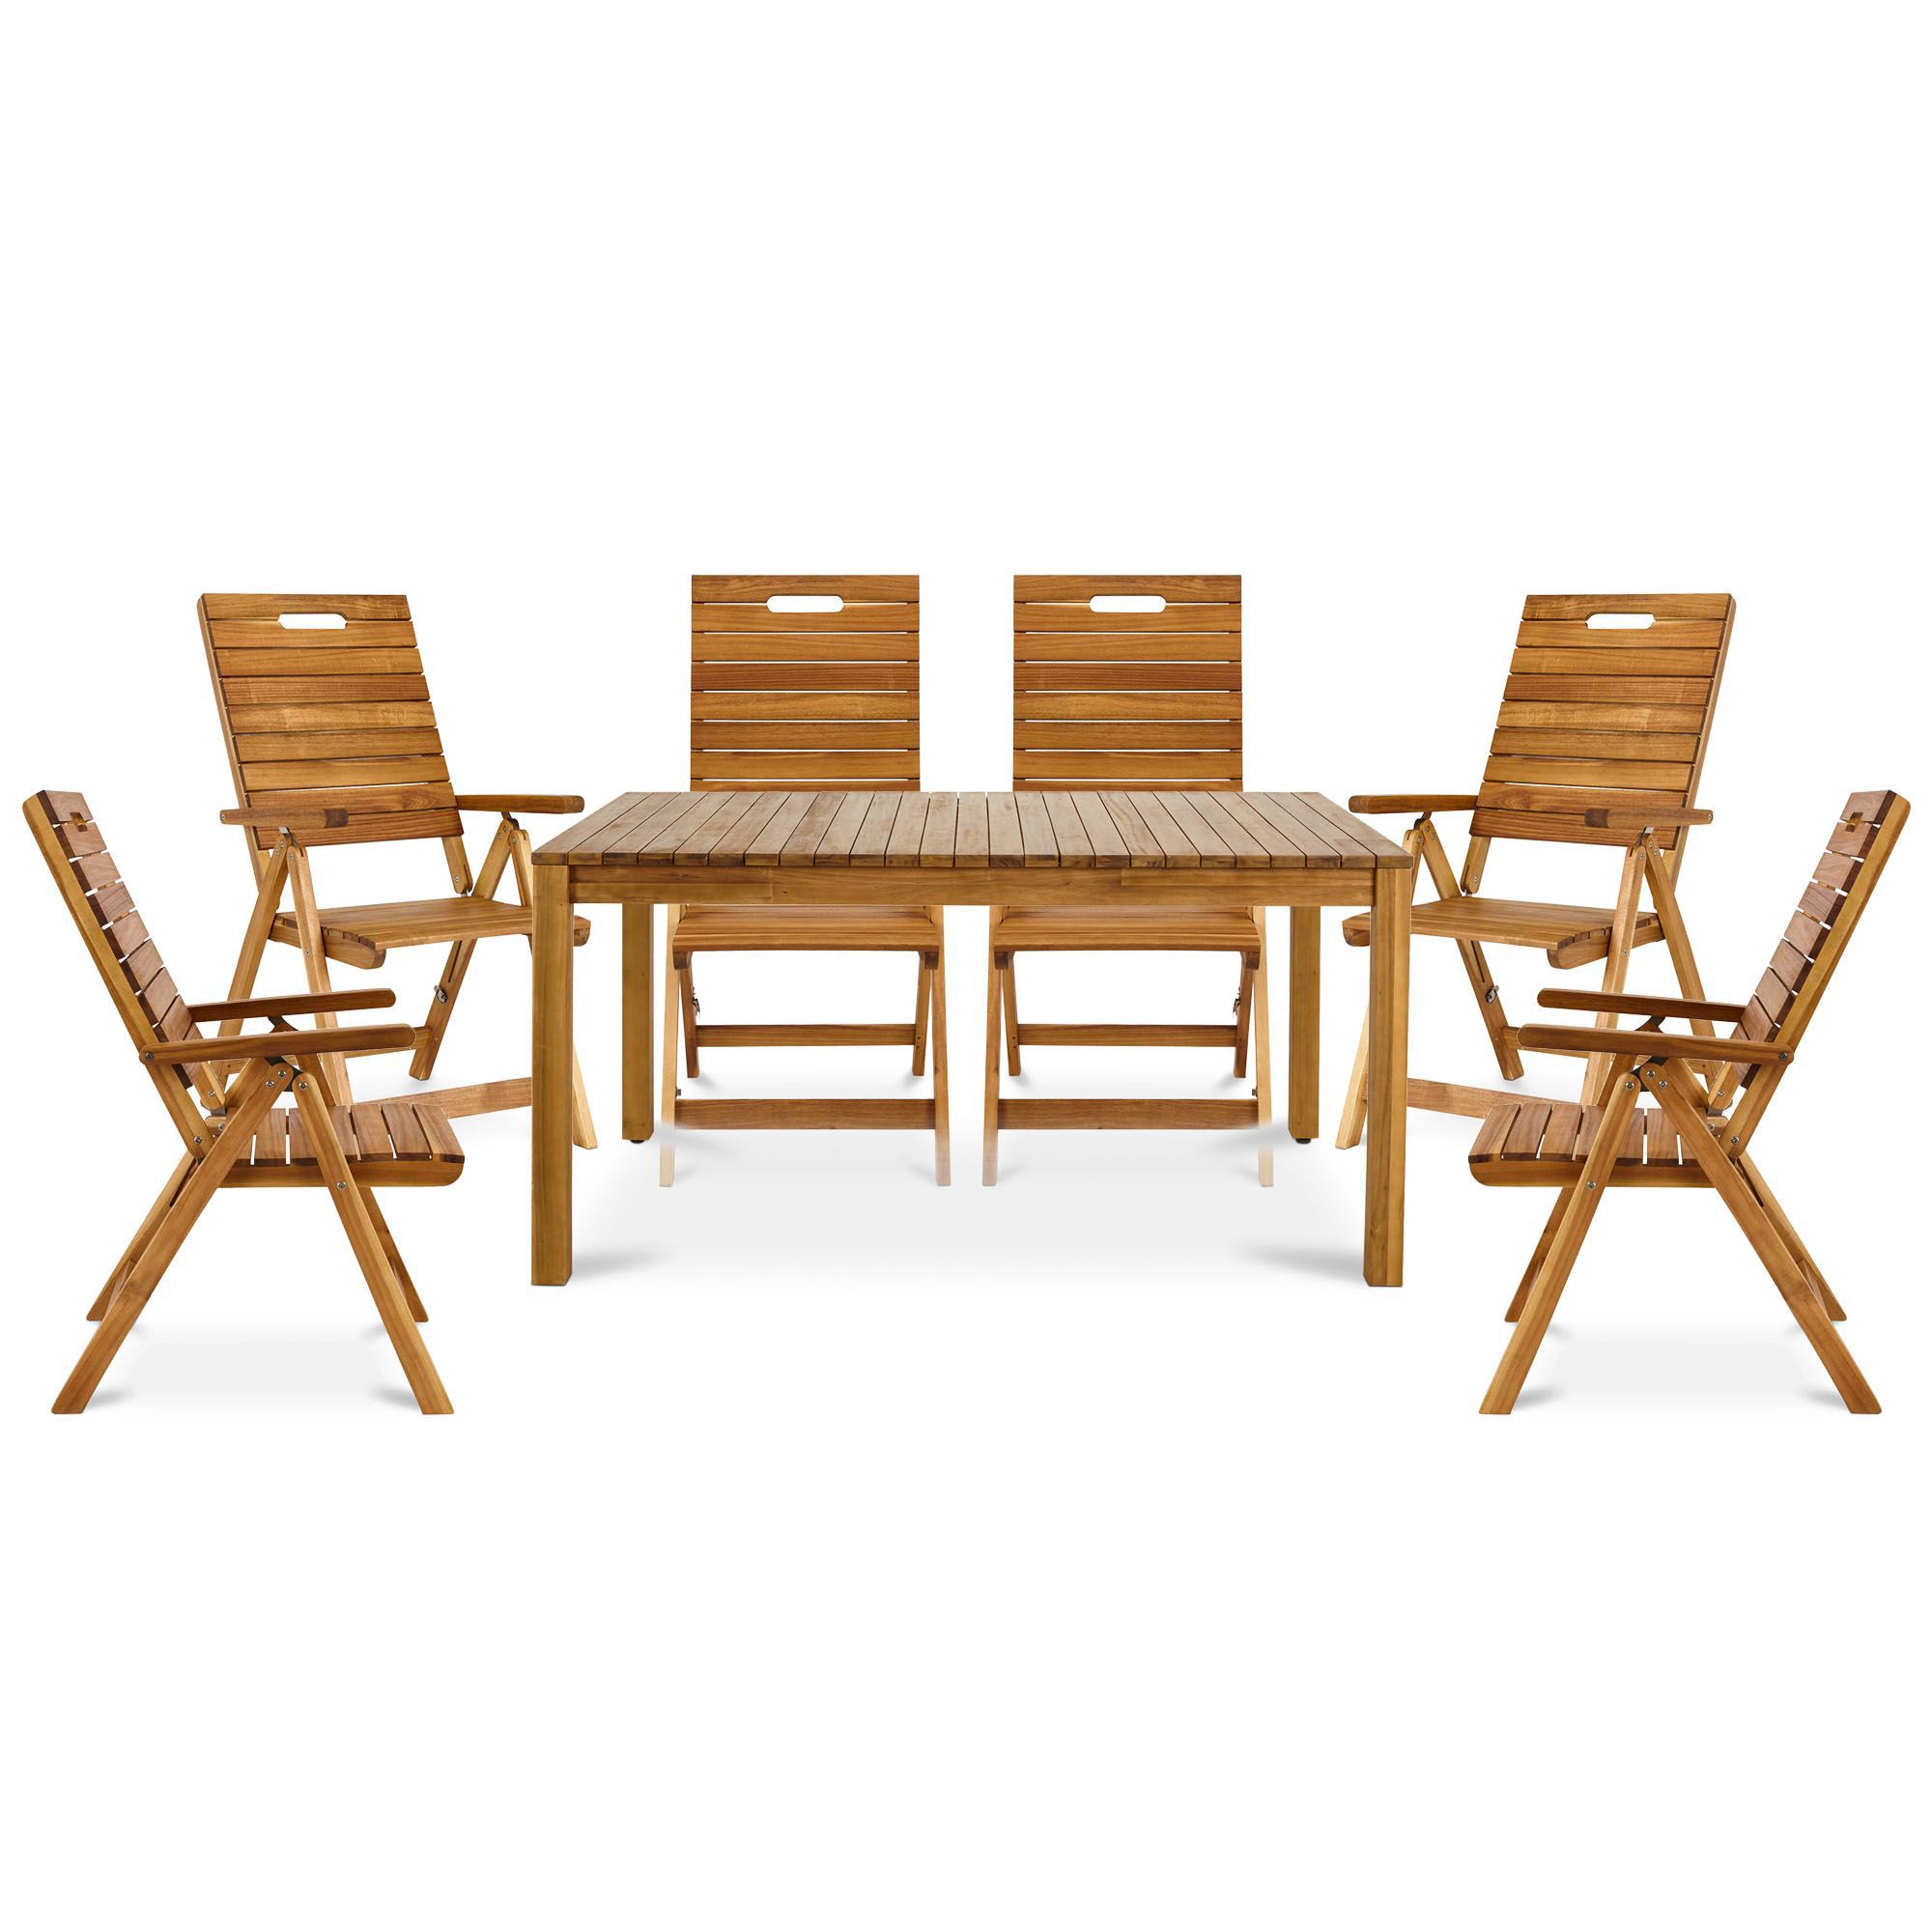 Denia Wooden 6 seater Dining set with Recliner chairs